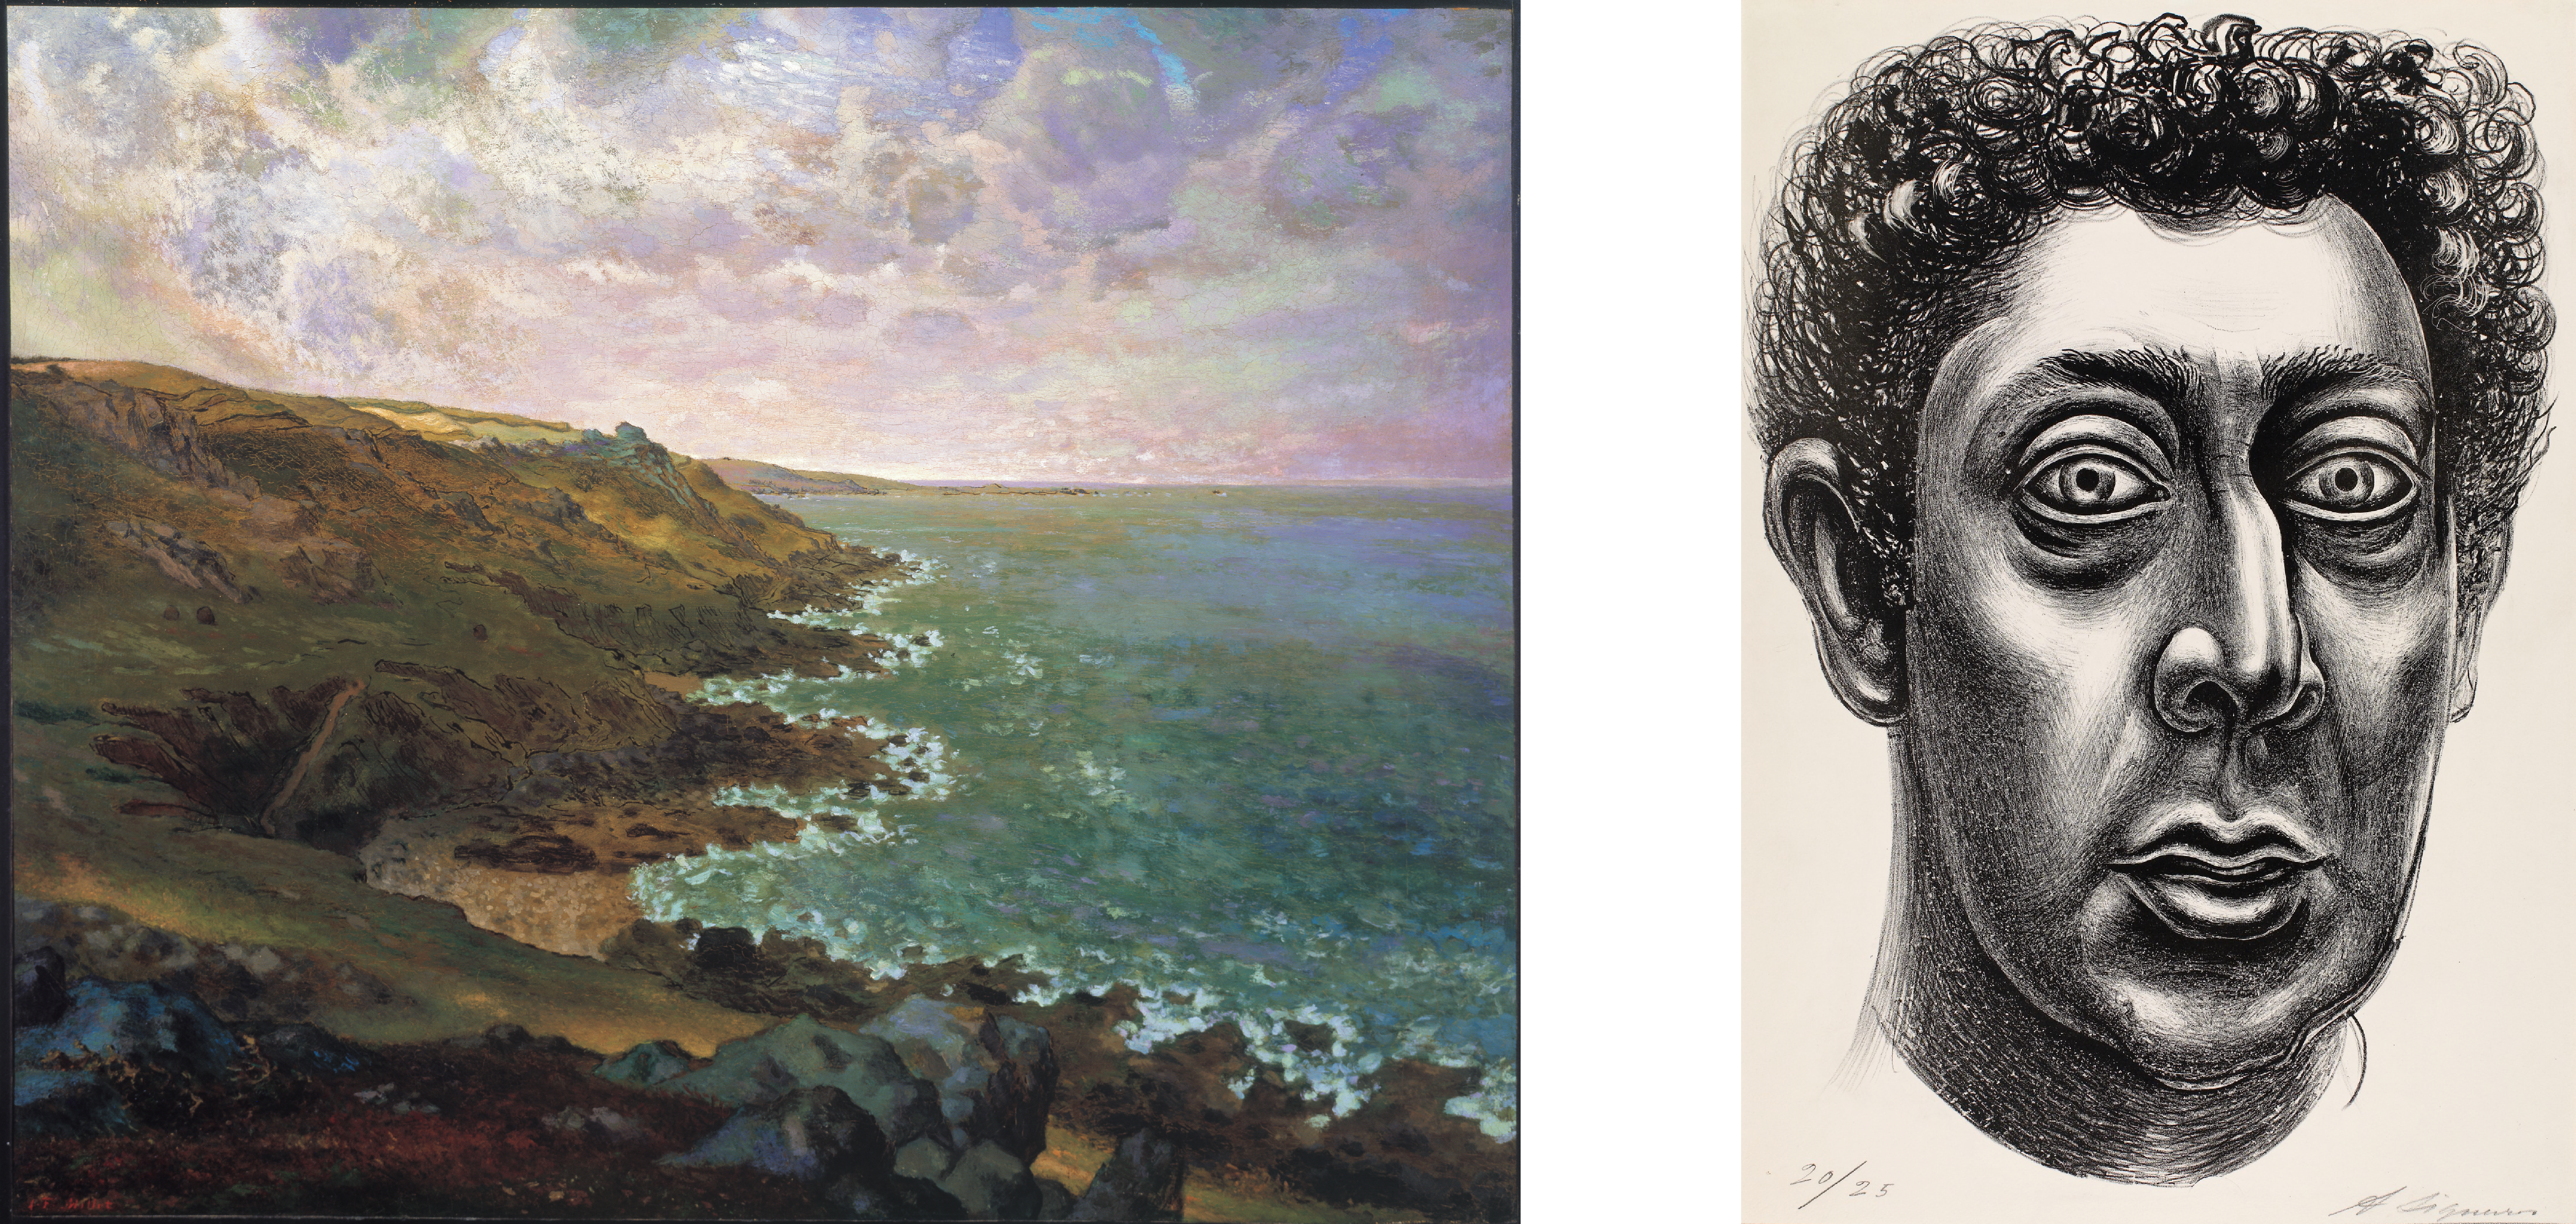 Two artworks, a painted landscape of a coastline at left and a black-and-white lithograph of a man's face at right